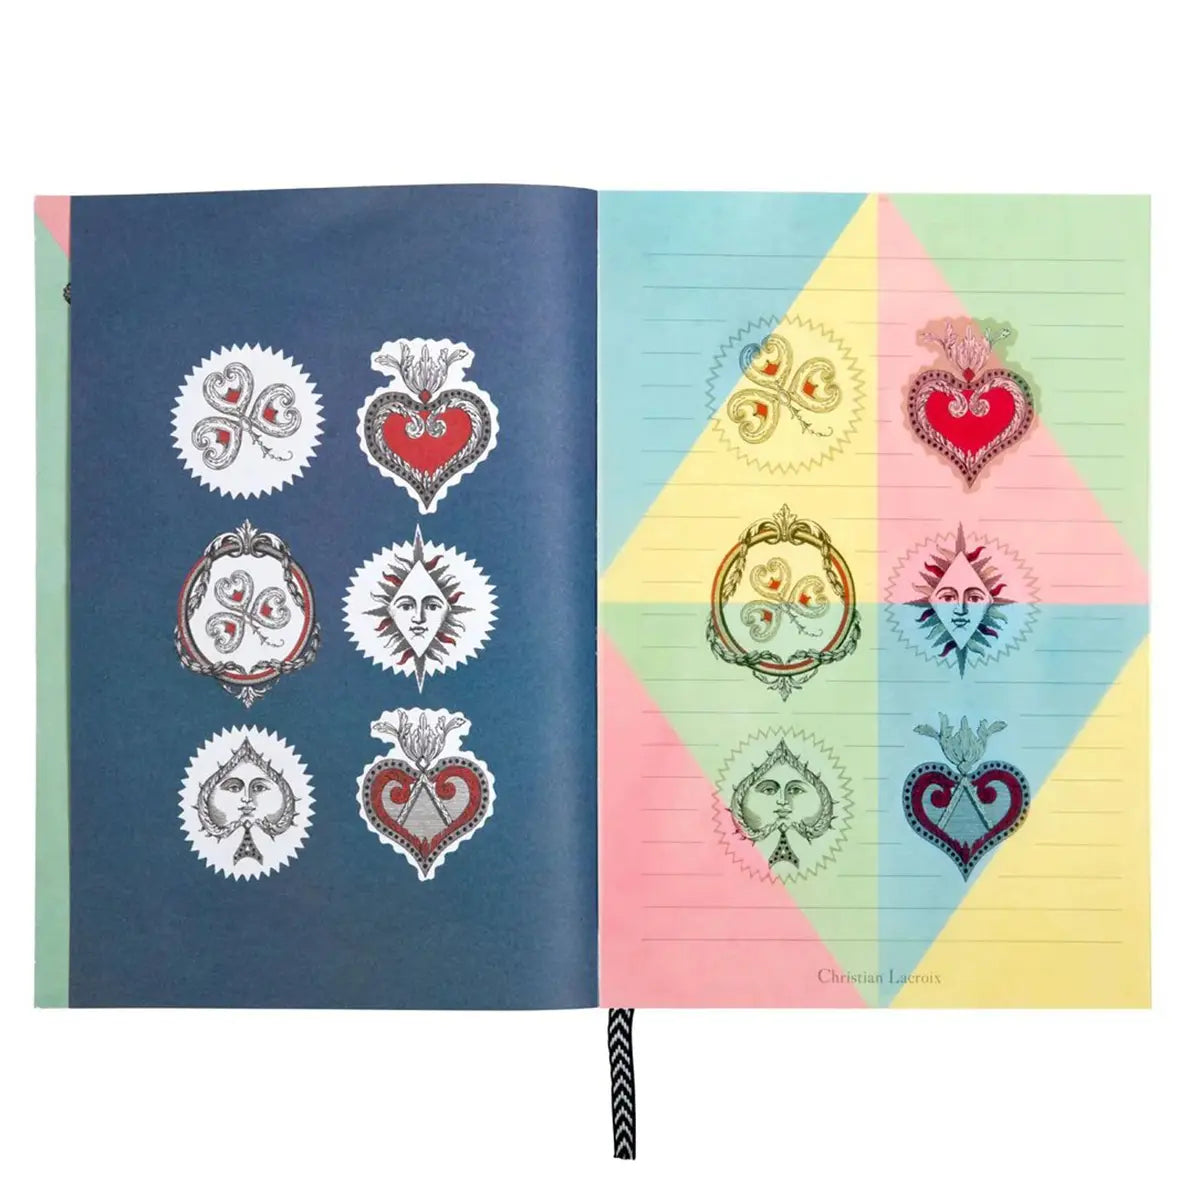 Inside pages of Hachette Christian Lacroix A5 Poker Face Notebook